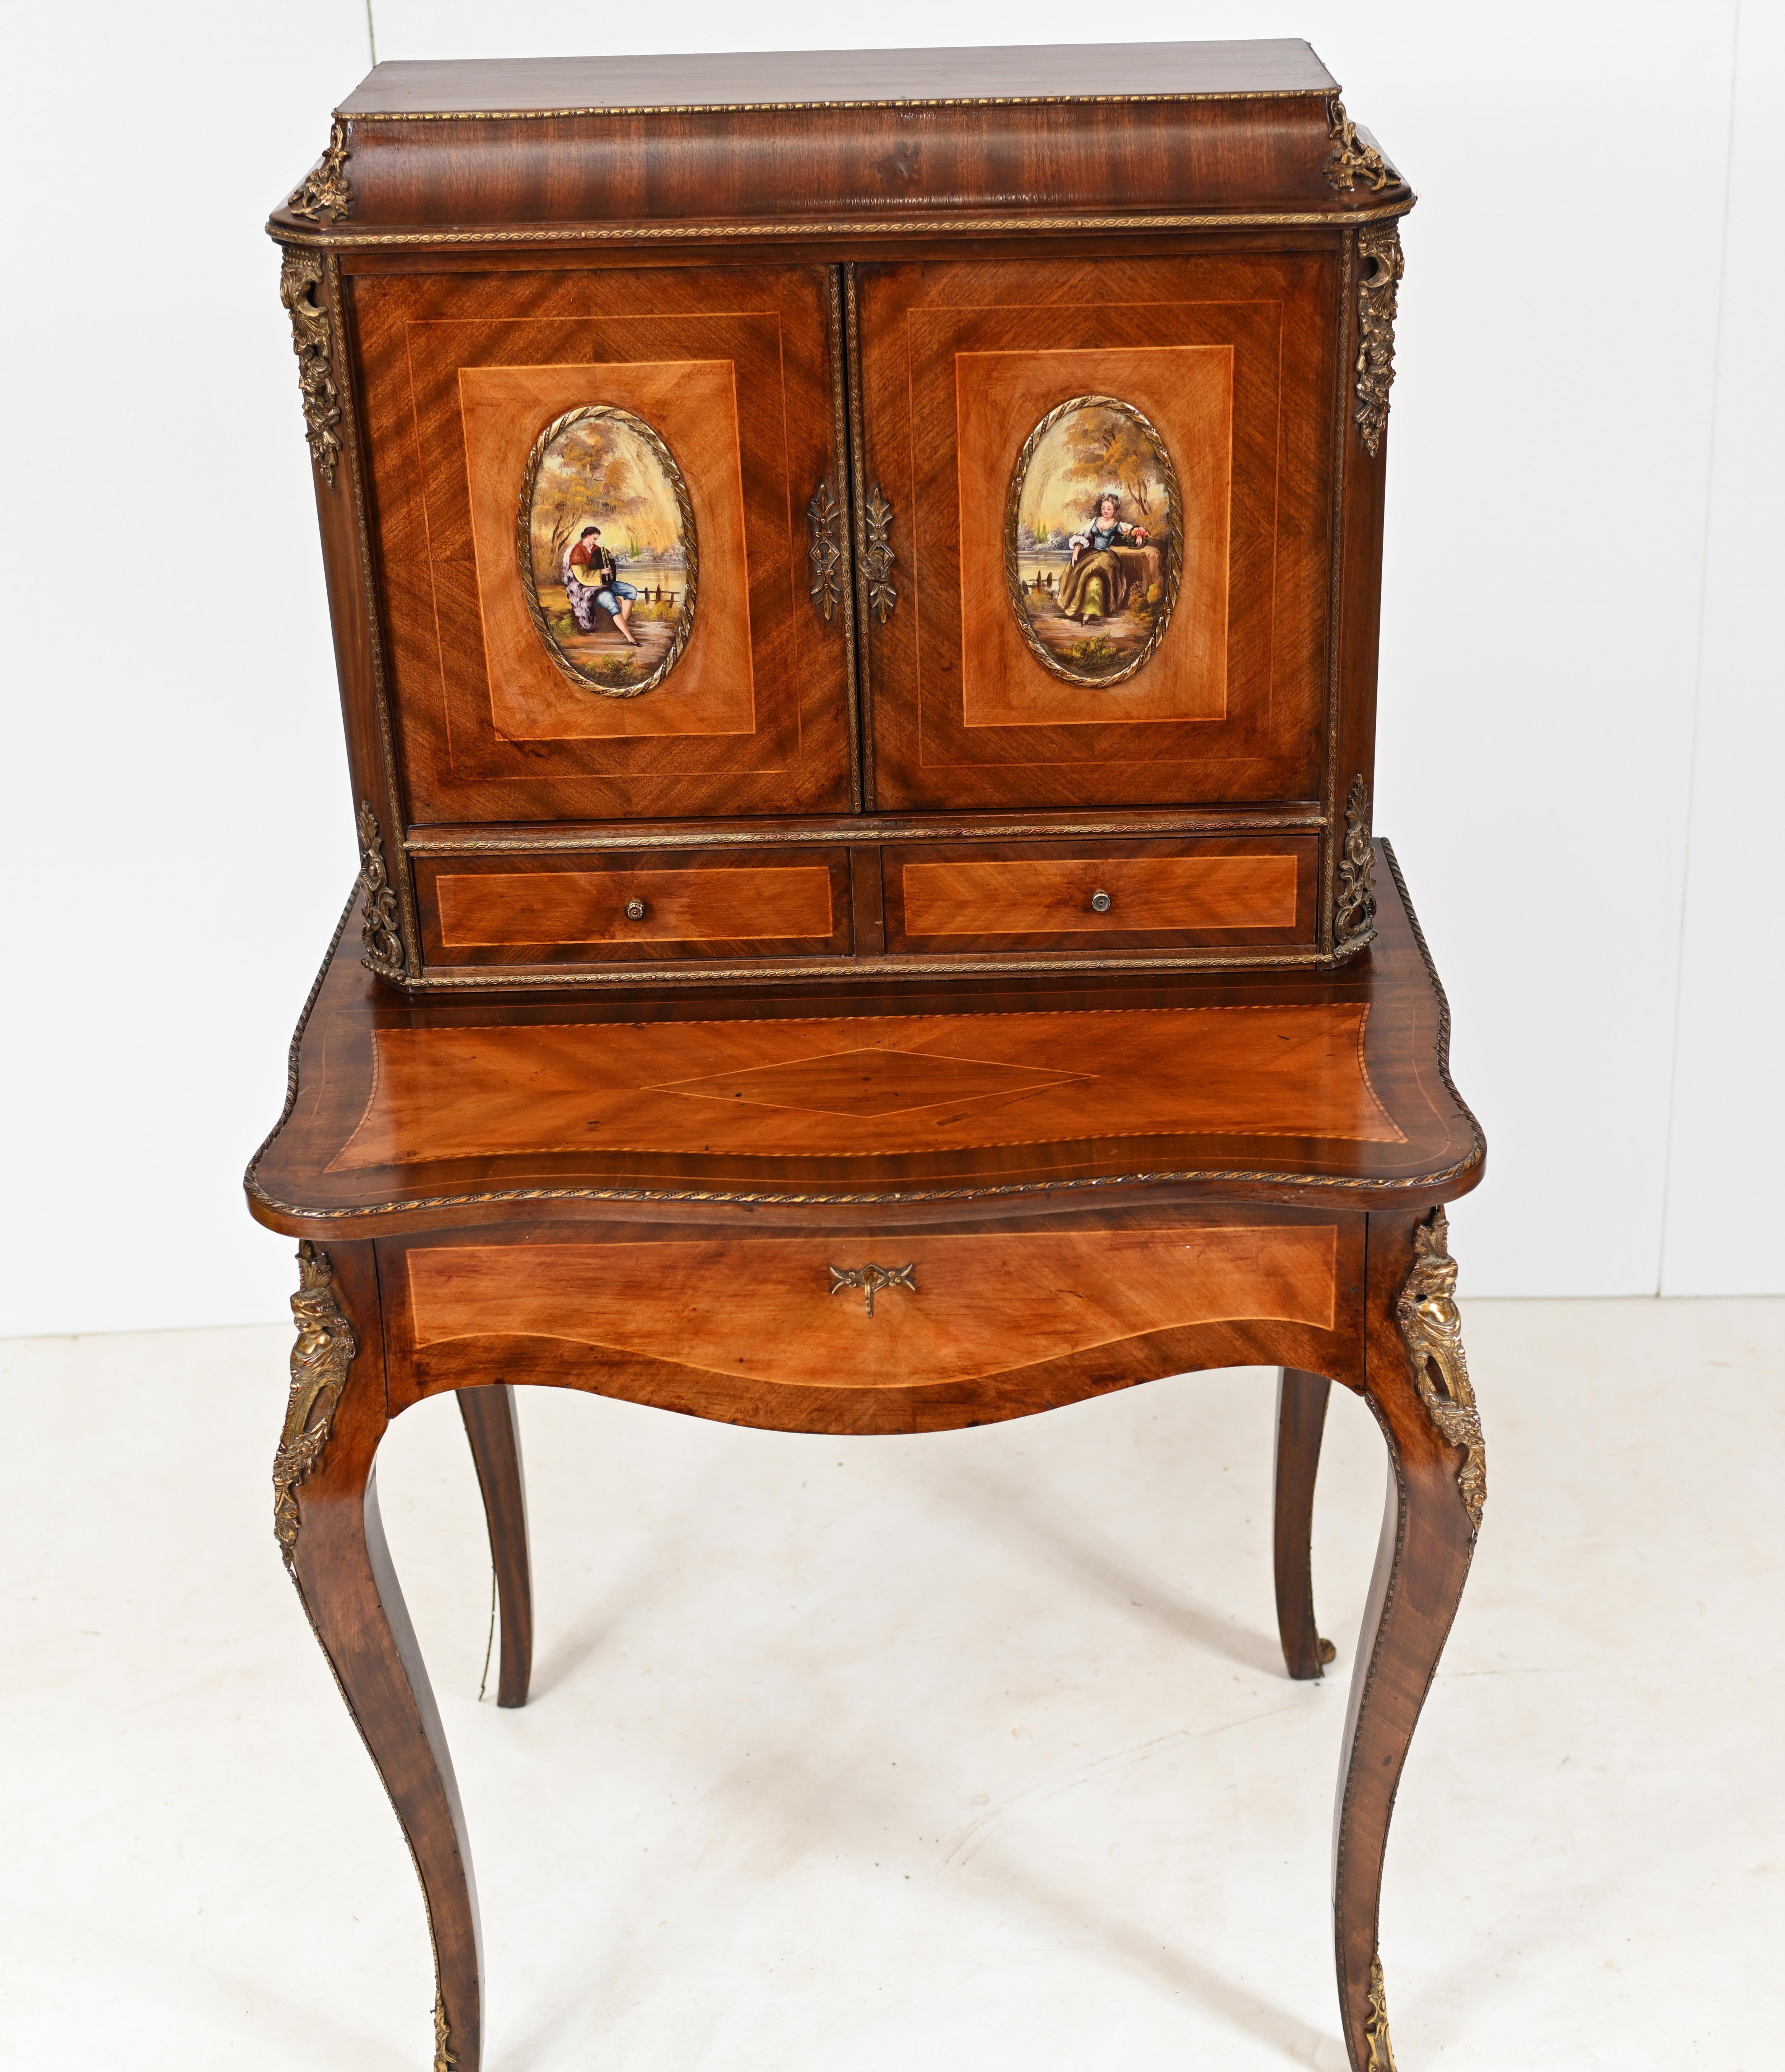 Stunning French Bonheur de Jour desk we date to circa 1920
Crafted from kingwood with painted plaques showing scenes of courtly love with two romantic couples
Top is a cabinet with drawers when opened out
Top drawer opens out to reveal green